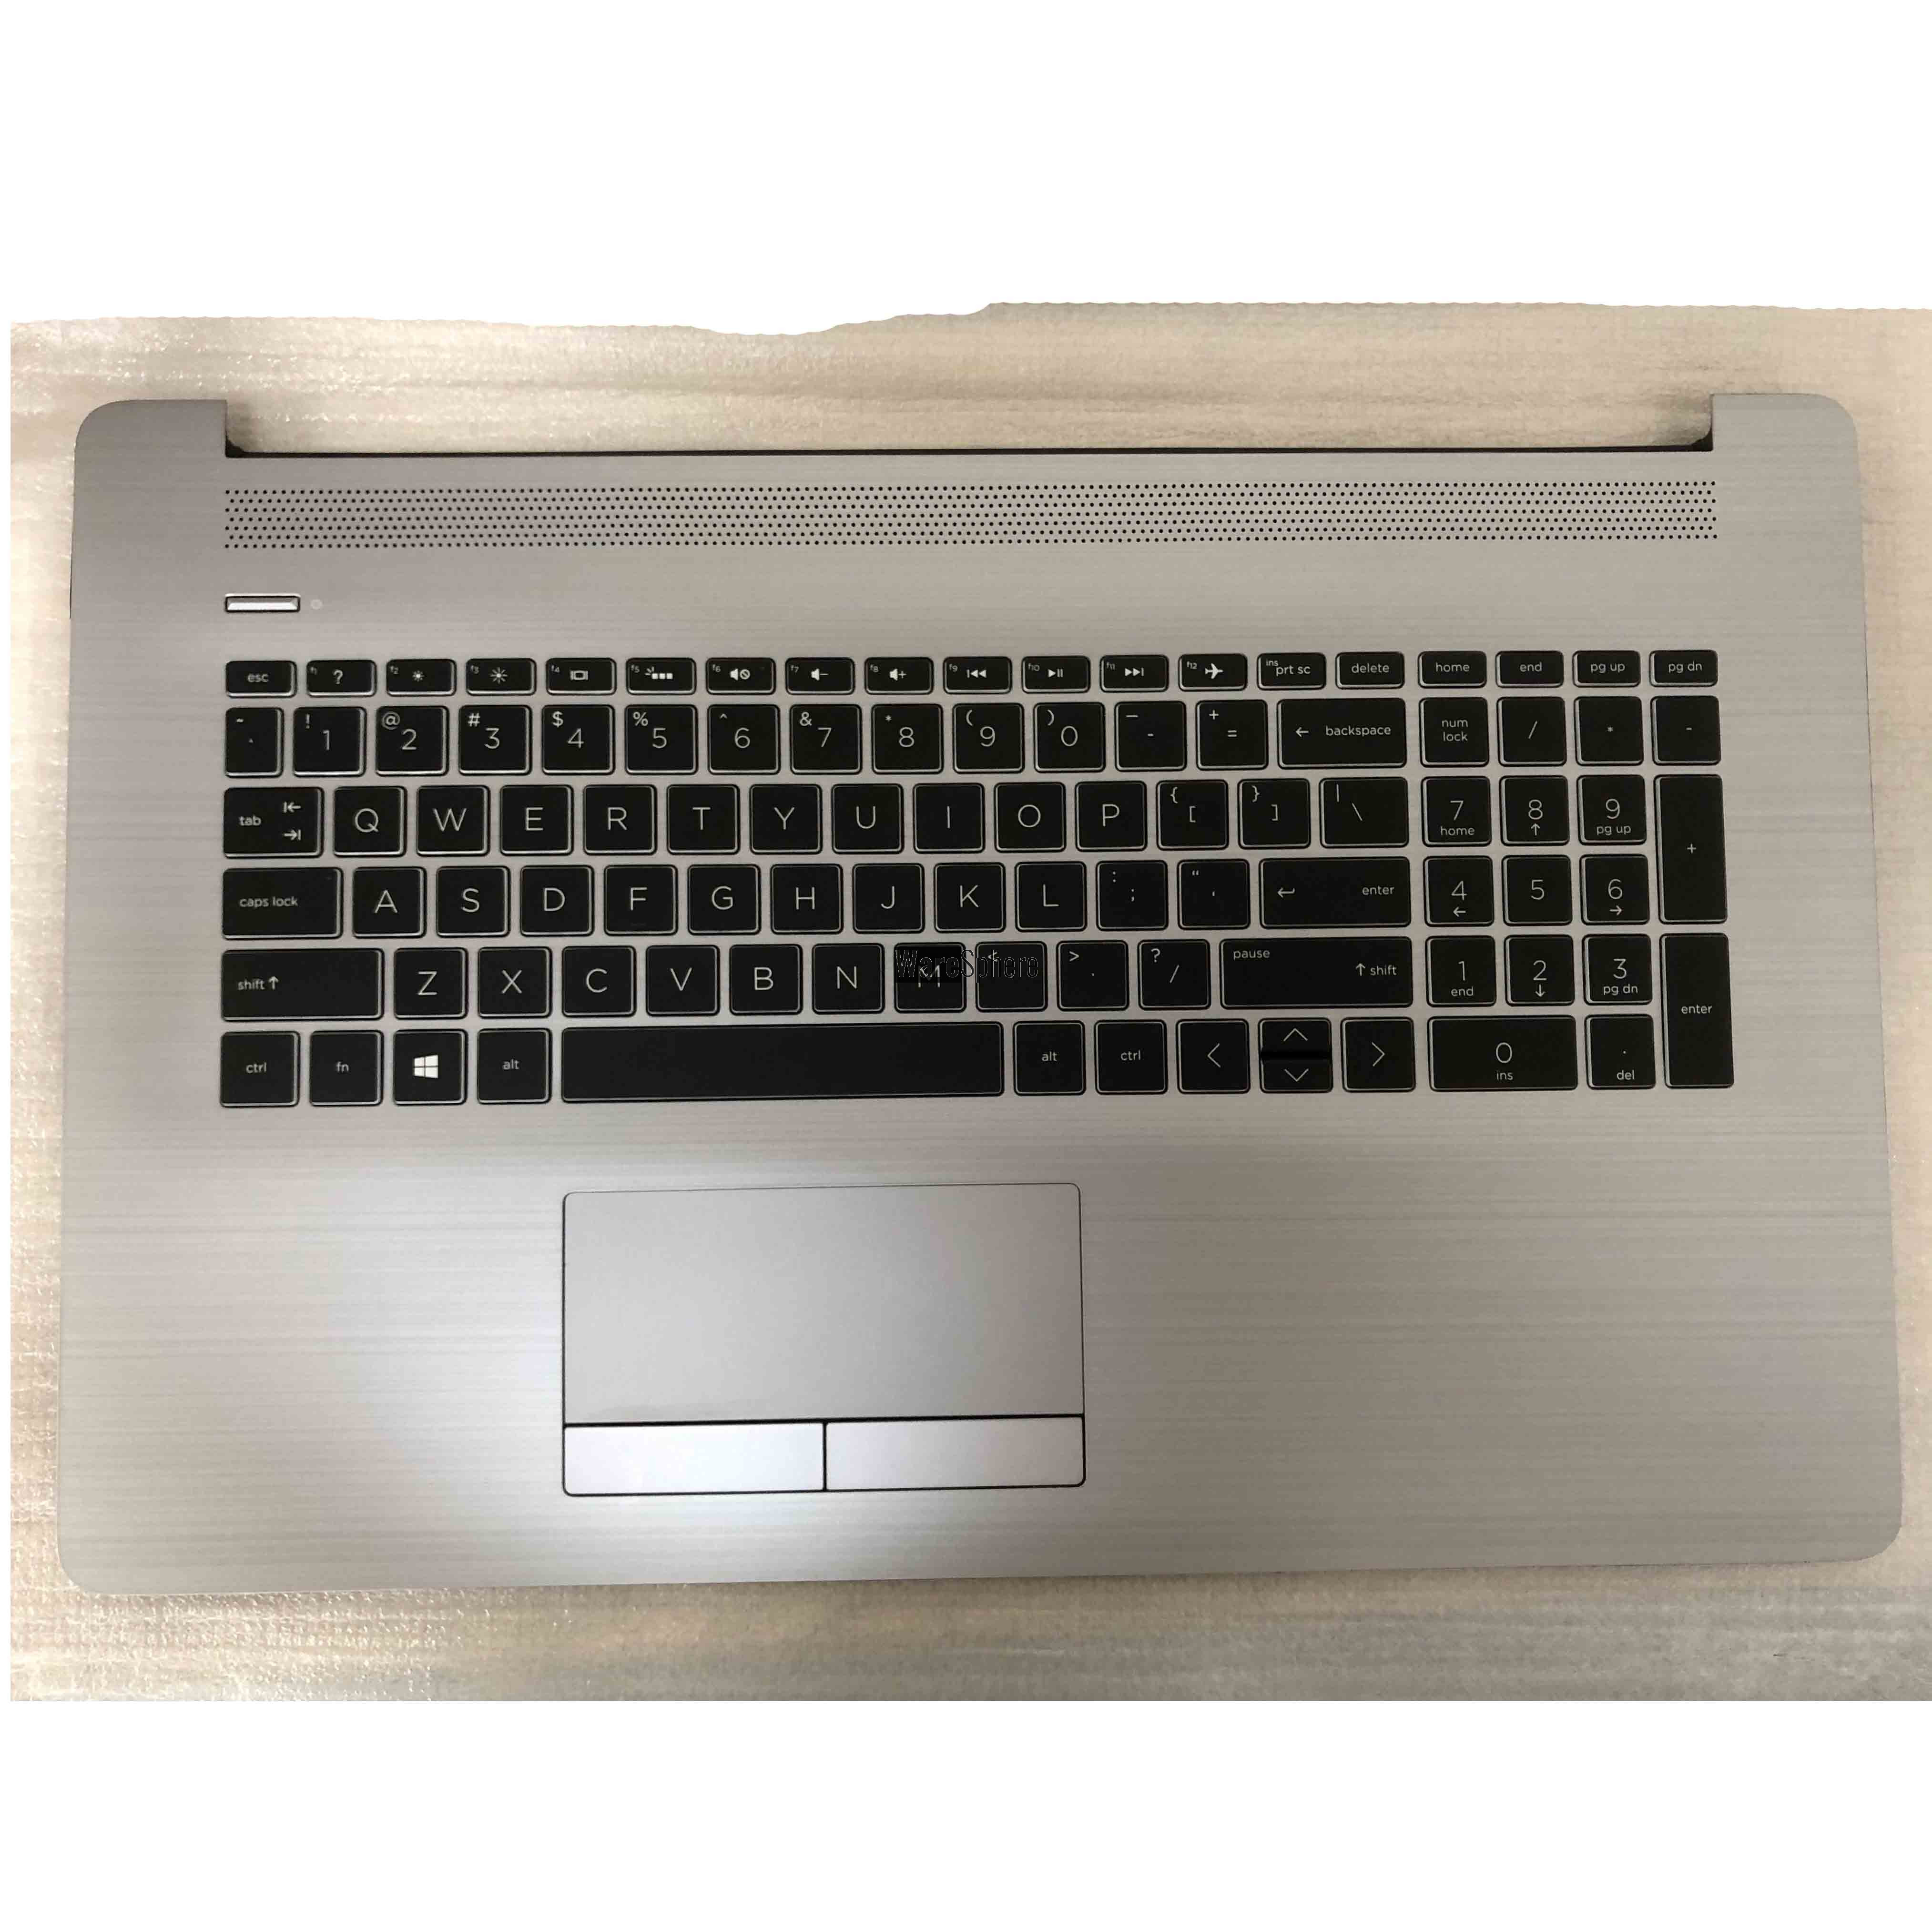 Top Cover Upper Case for HP 470 G7 With Backlit Keyboard L83727-001 6070B1714501 Without ODD Silver